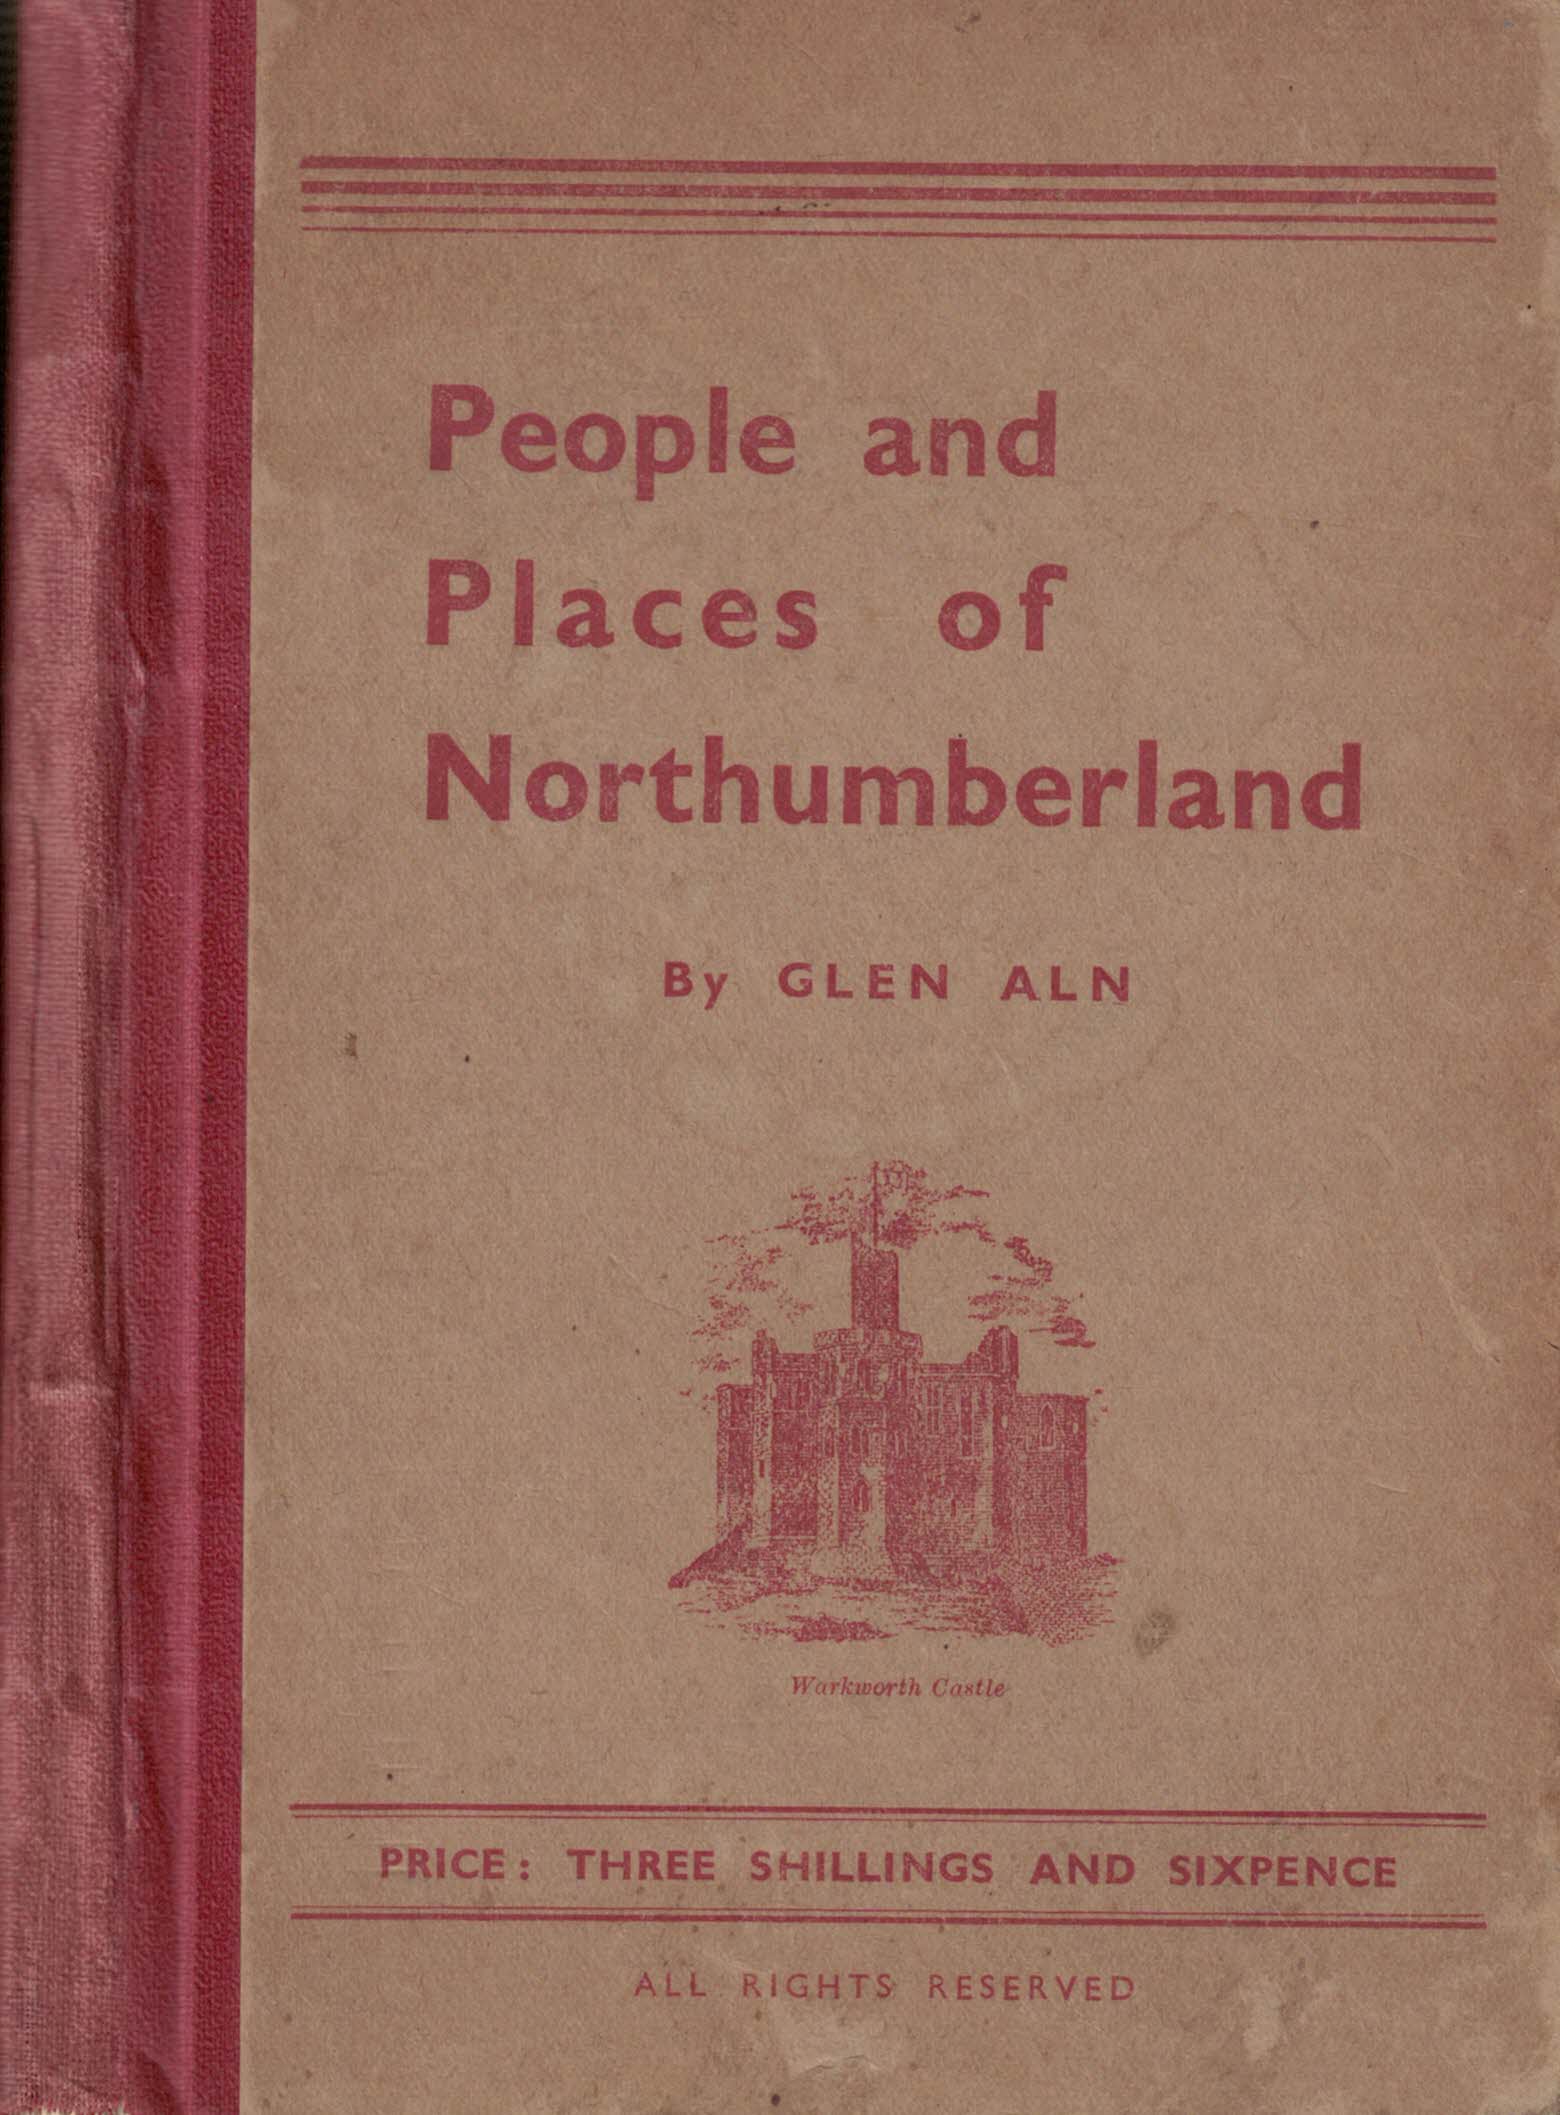 People and Places of Northumberland